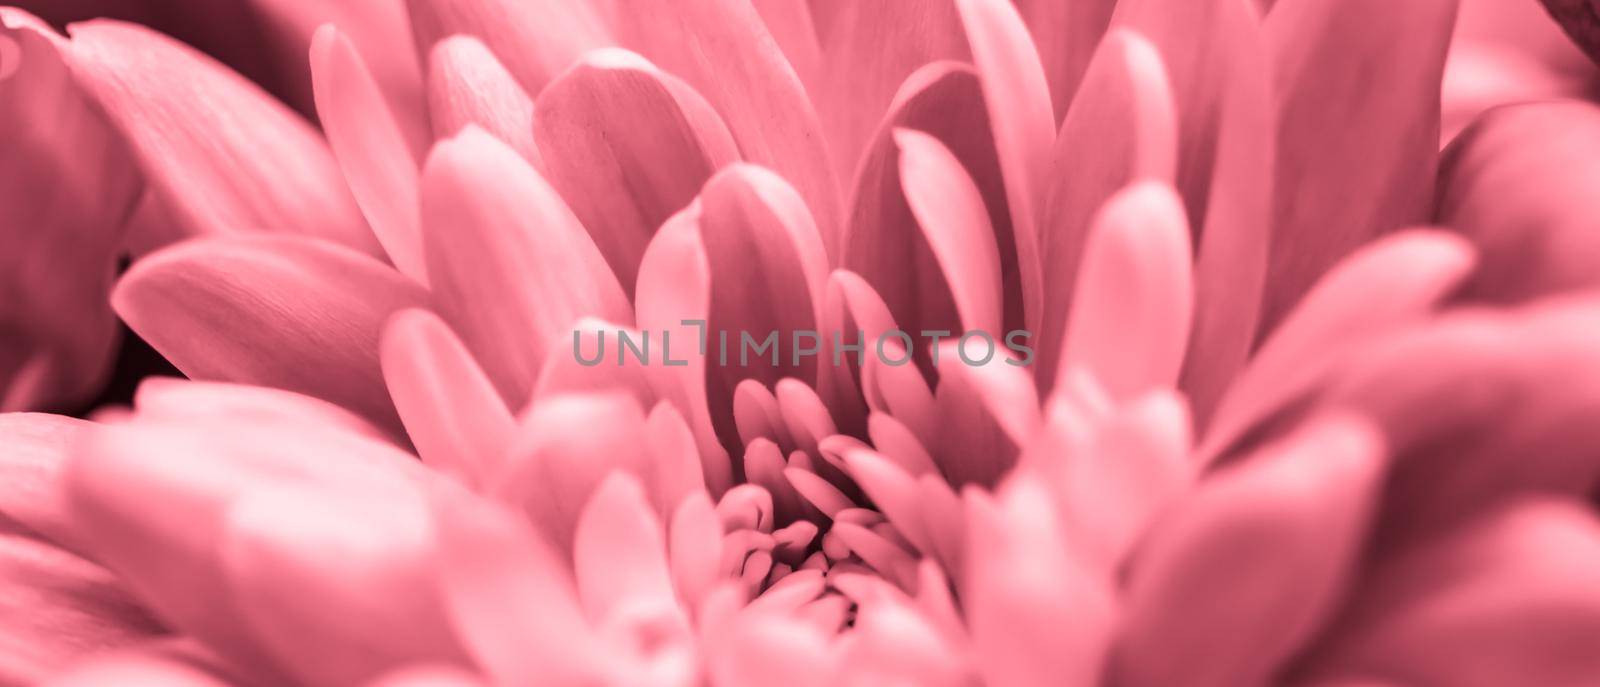 Retro art, vintage card and botanical concept - Abstract floral background, pink chrysanthemum flower. Macro flowers backdrop for holiday brand design